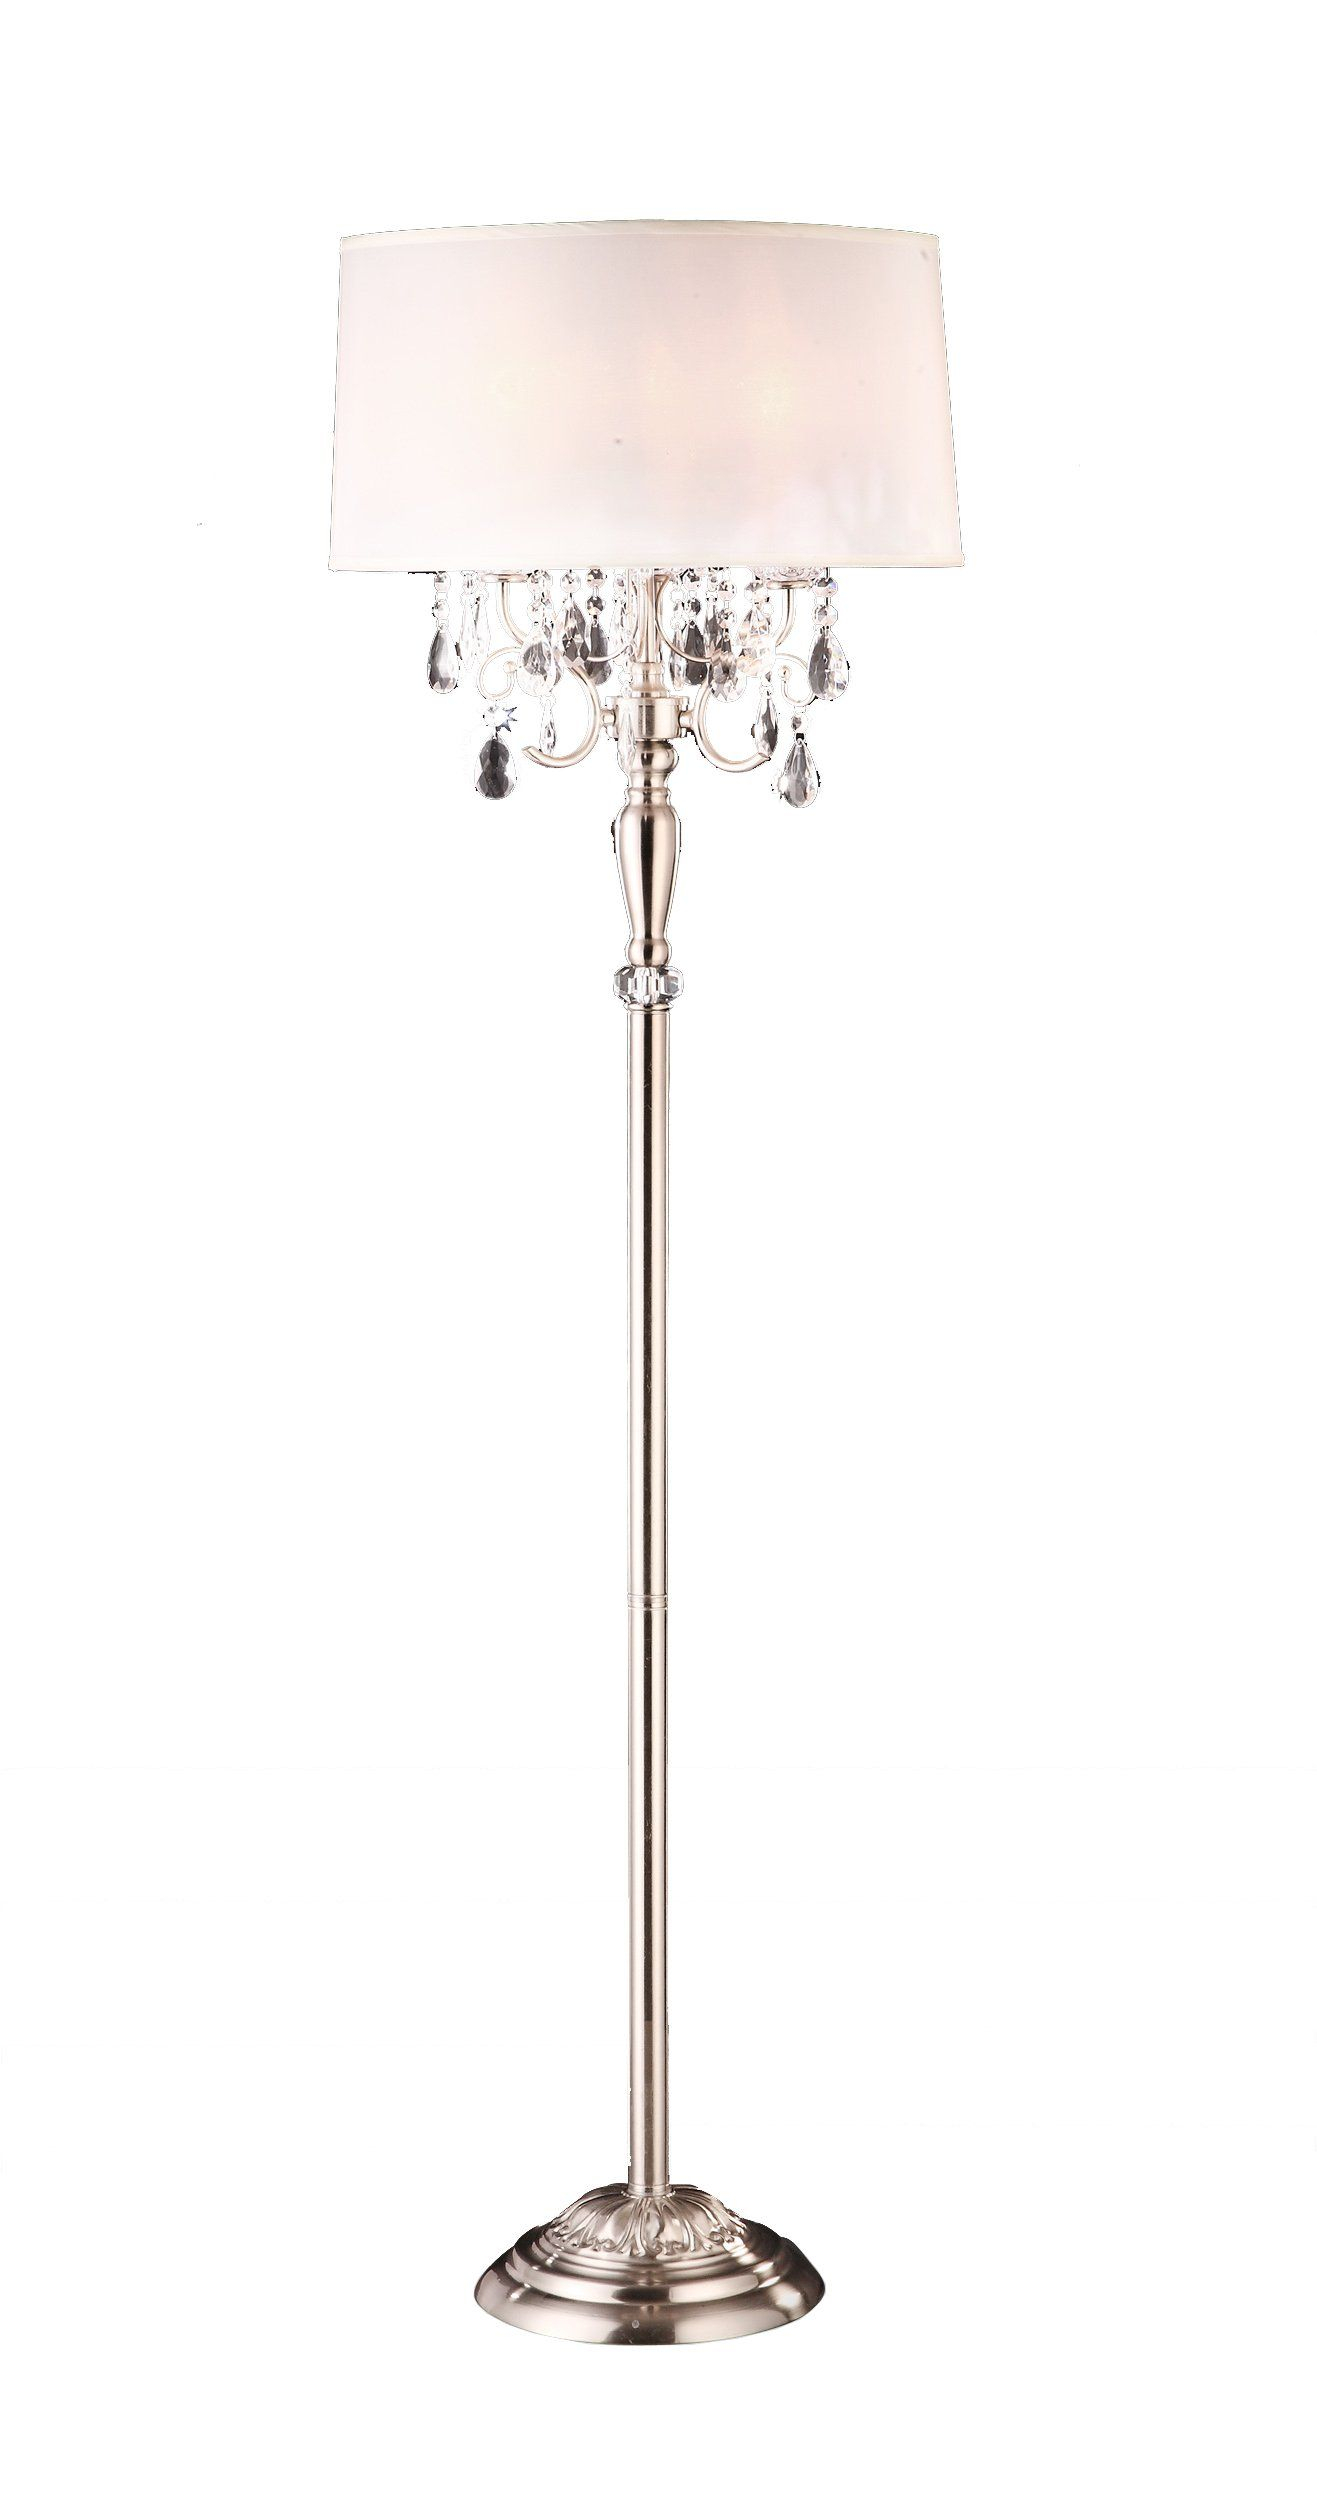 62h Crystal Chandelier Floor Lamp White Shade On A Brush inside size 1317 X 2496